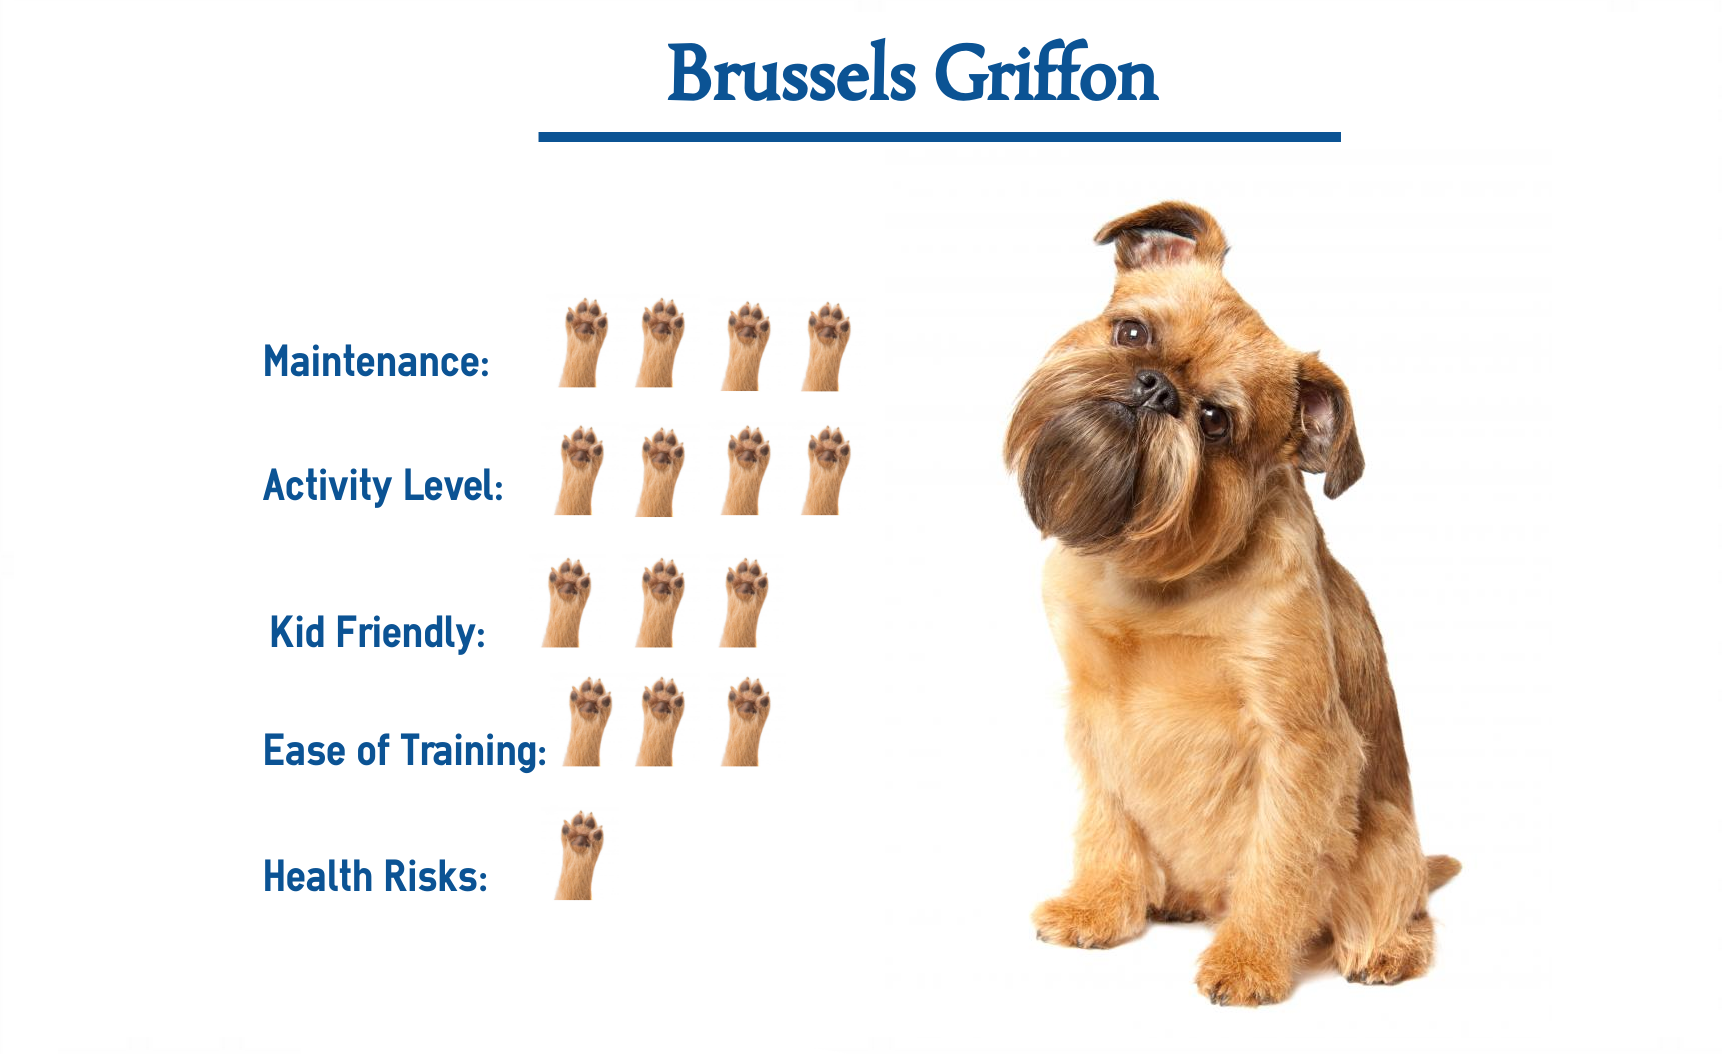 Are Brussels Griffons Child Friendly